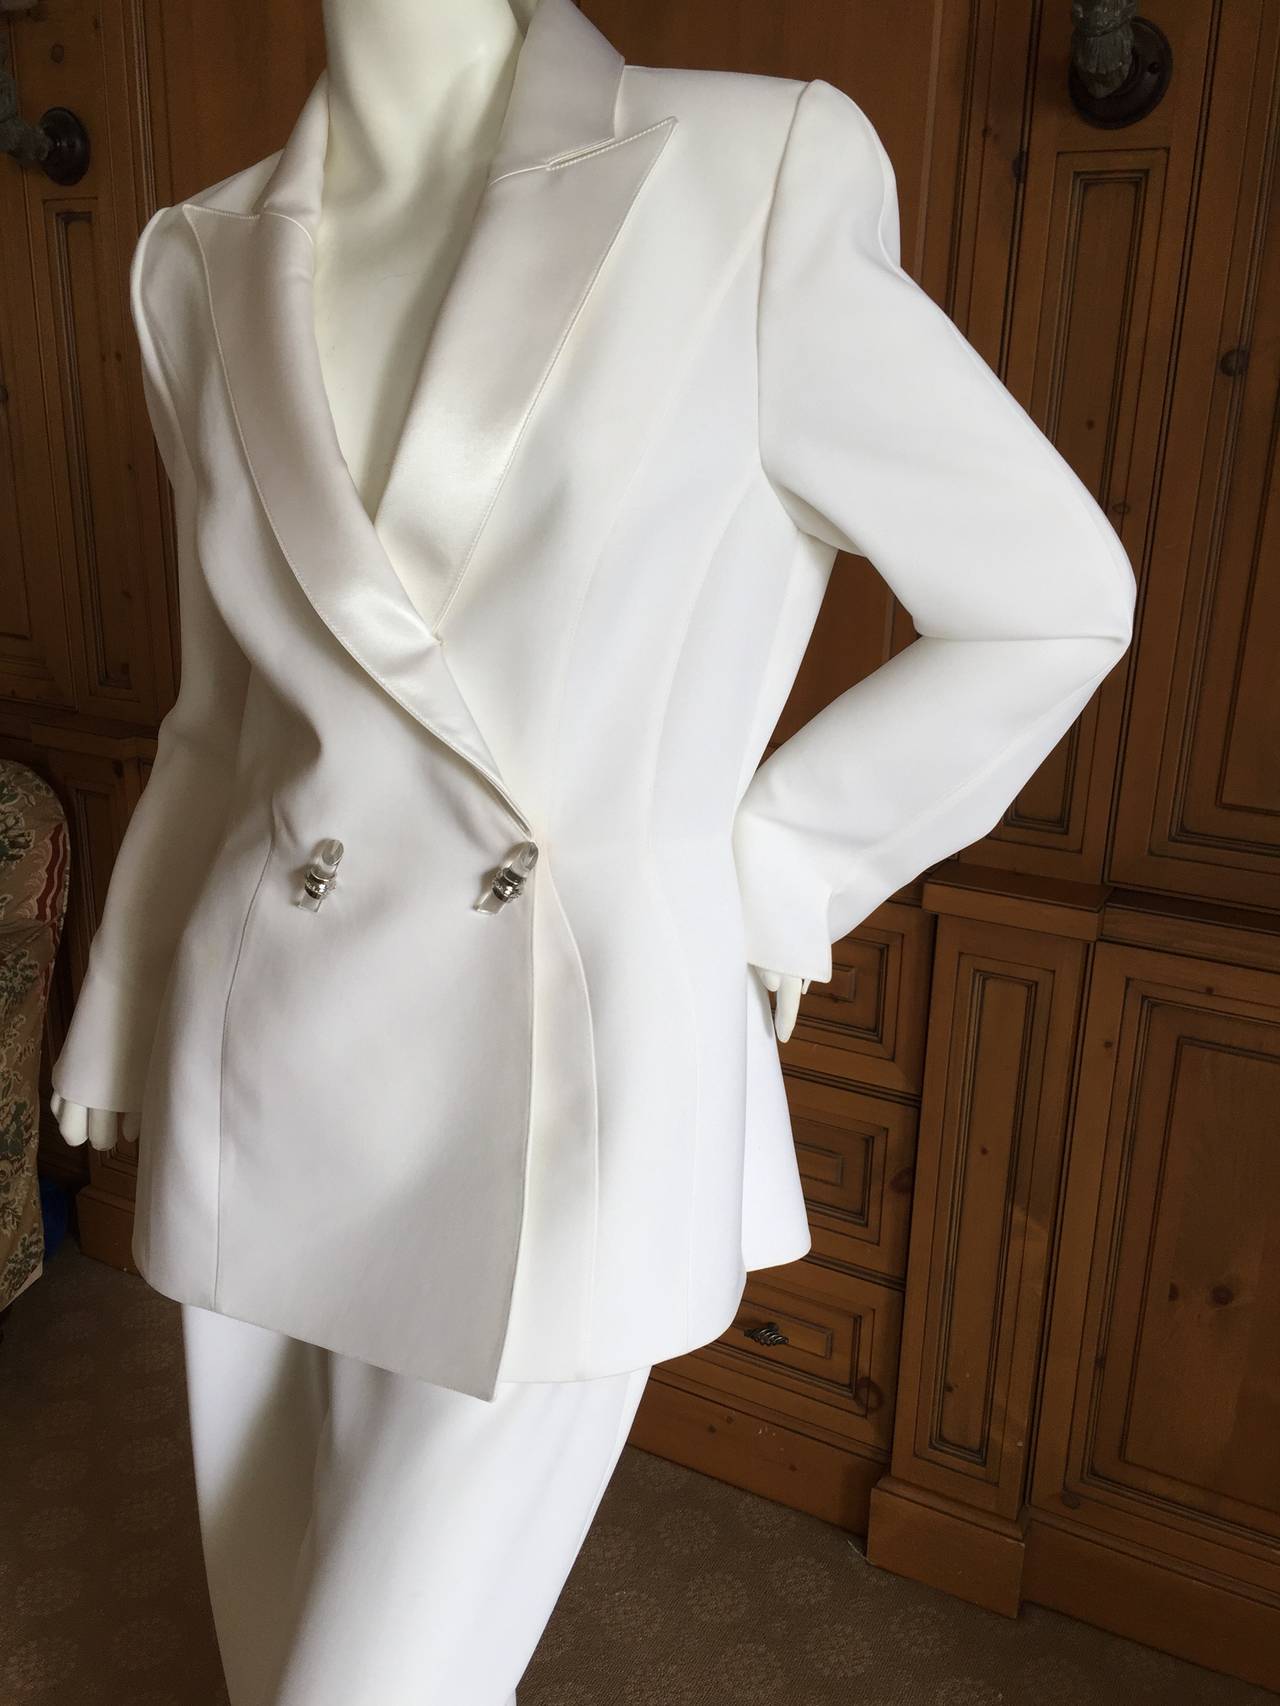 Thierry Mugler Vintage Ivory Tuxedo with Satin Lapels.
Cut to perfection, the details are pure Mugler.
Please use the zoom feature to see the details.
Crystal buttons and satin lapels.
Size 44
Bust 40